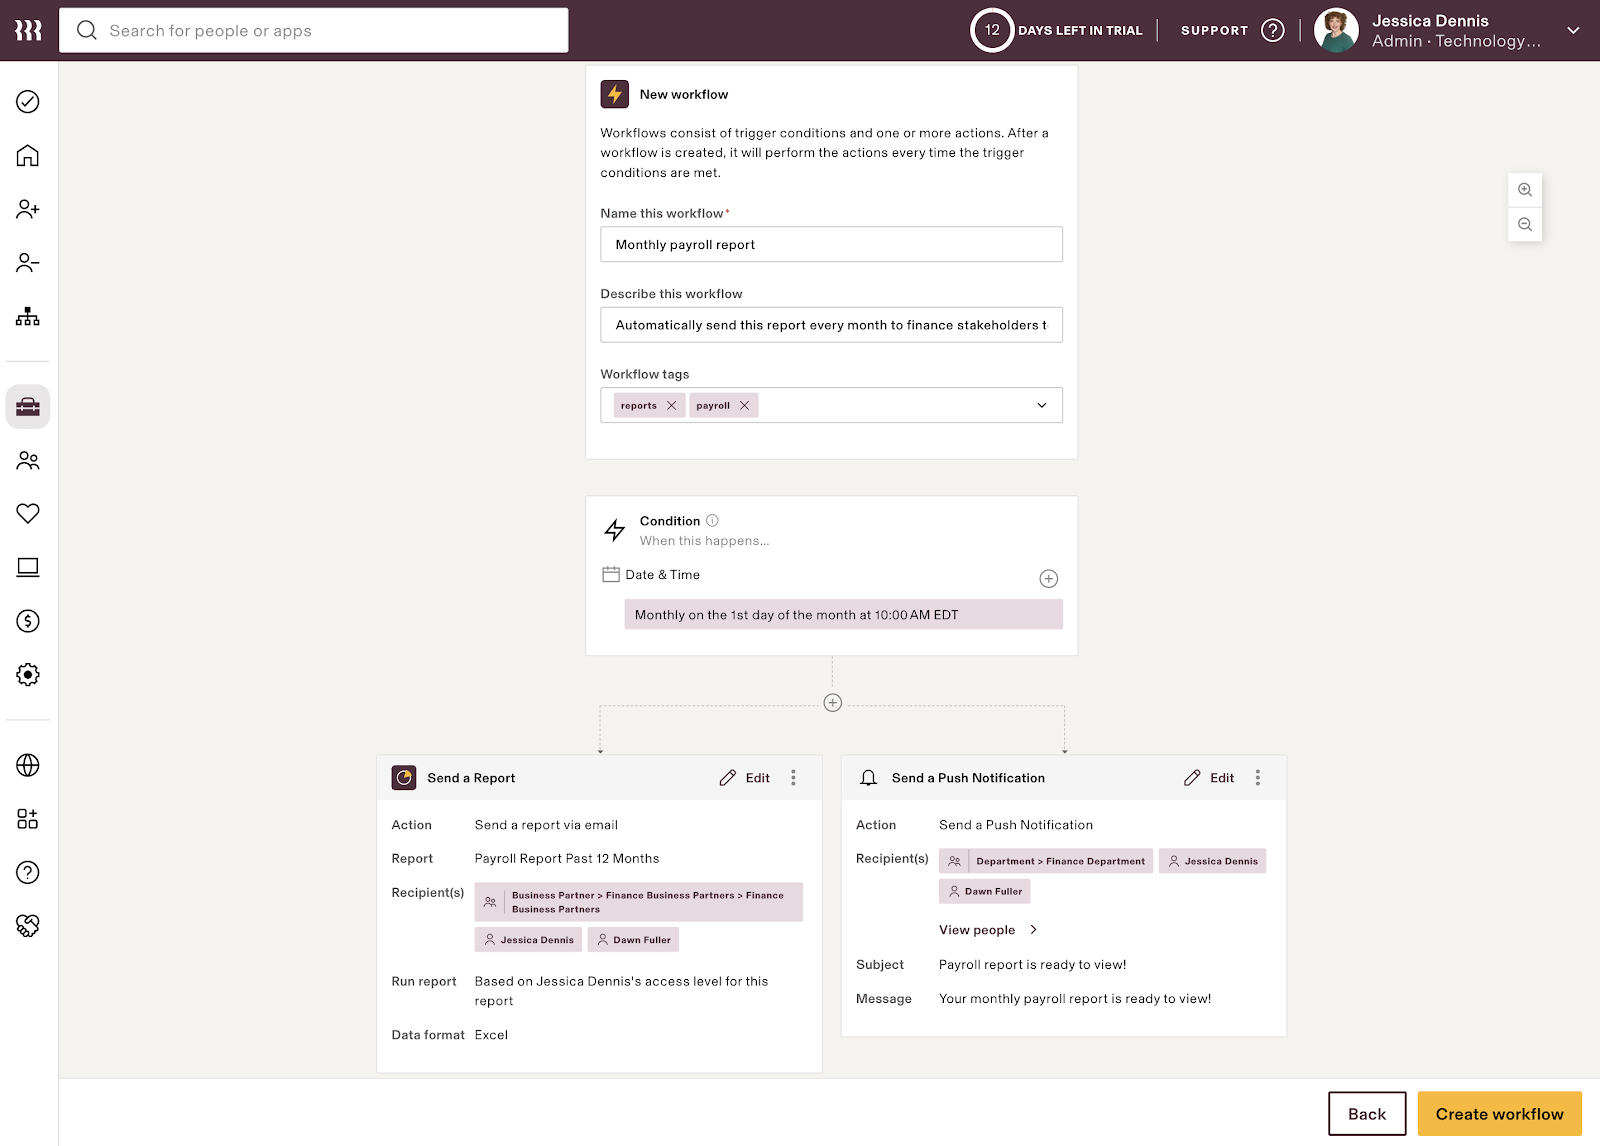 Rippling displays a workflow diagram with the action blocks “send a report” and “send a push notification” branching off from the trigger block “monthly on the 1st day of the month at 10:00 AM.”